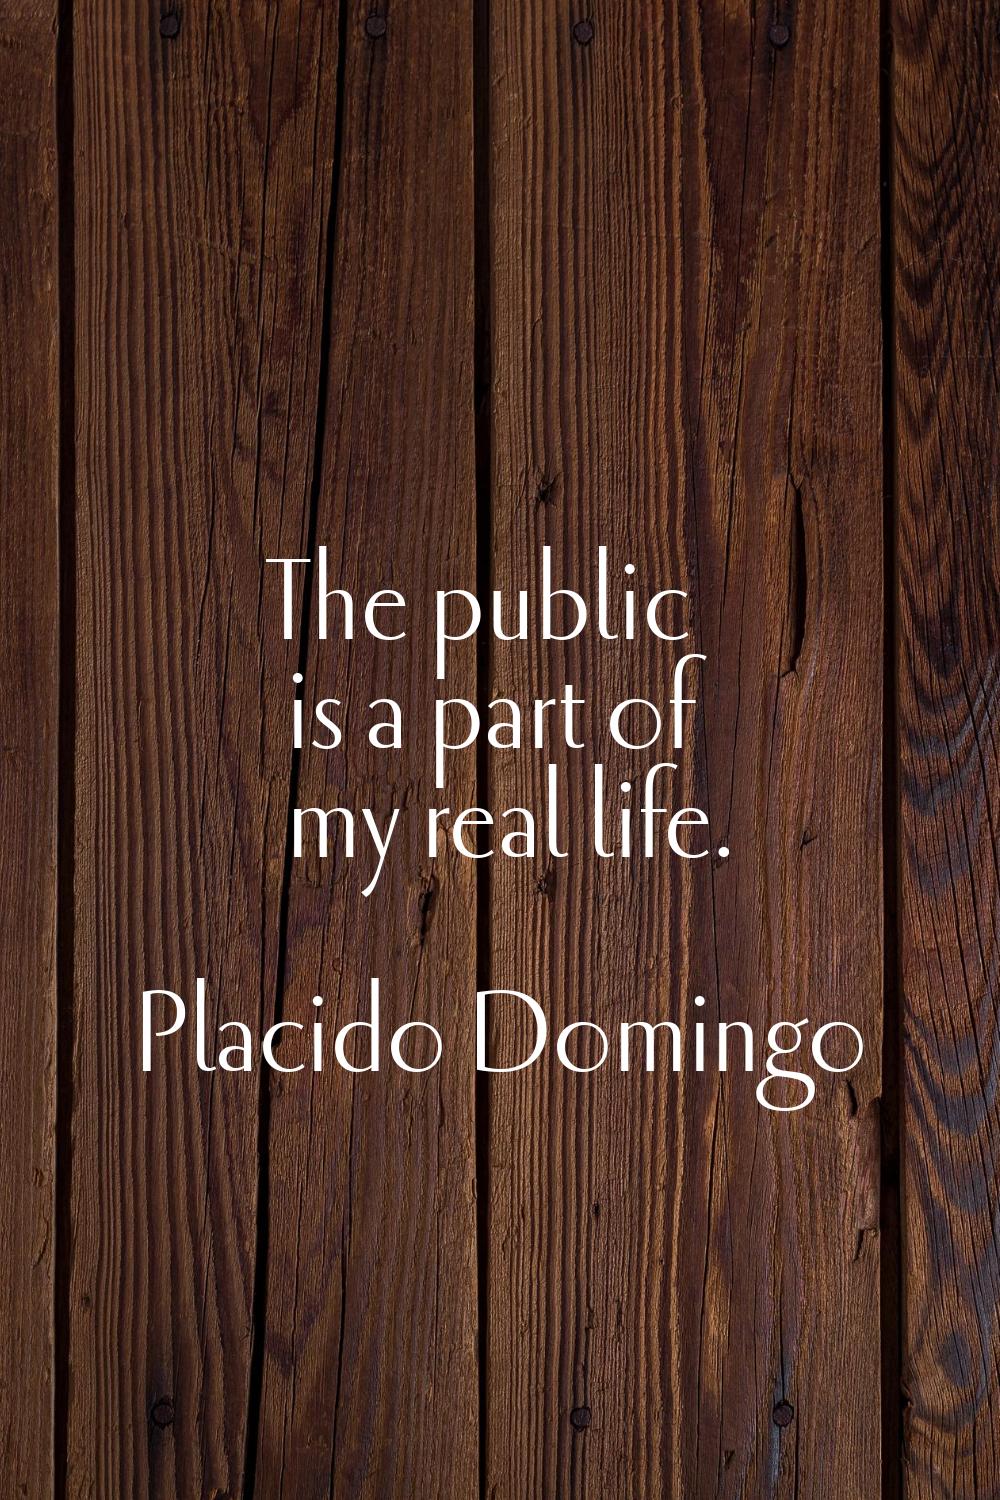 The public is a part of my real life.